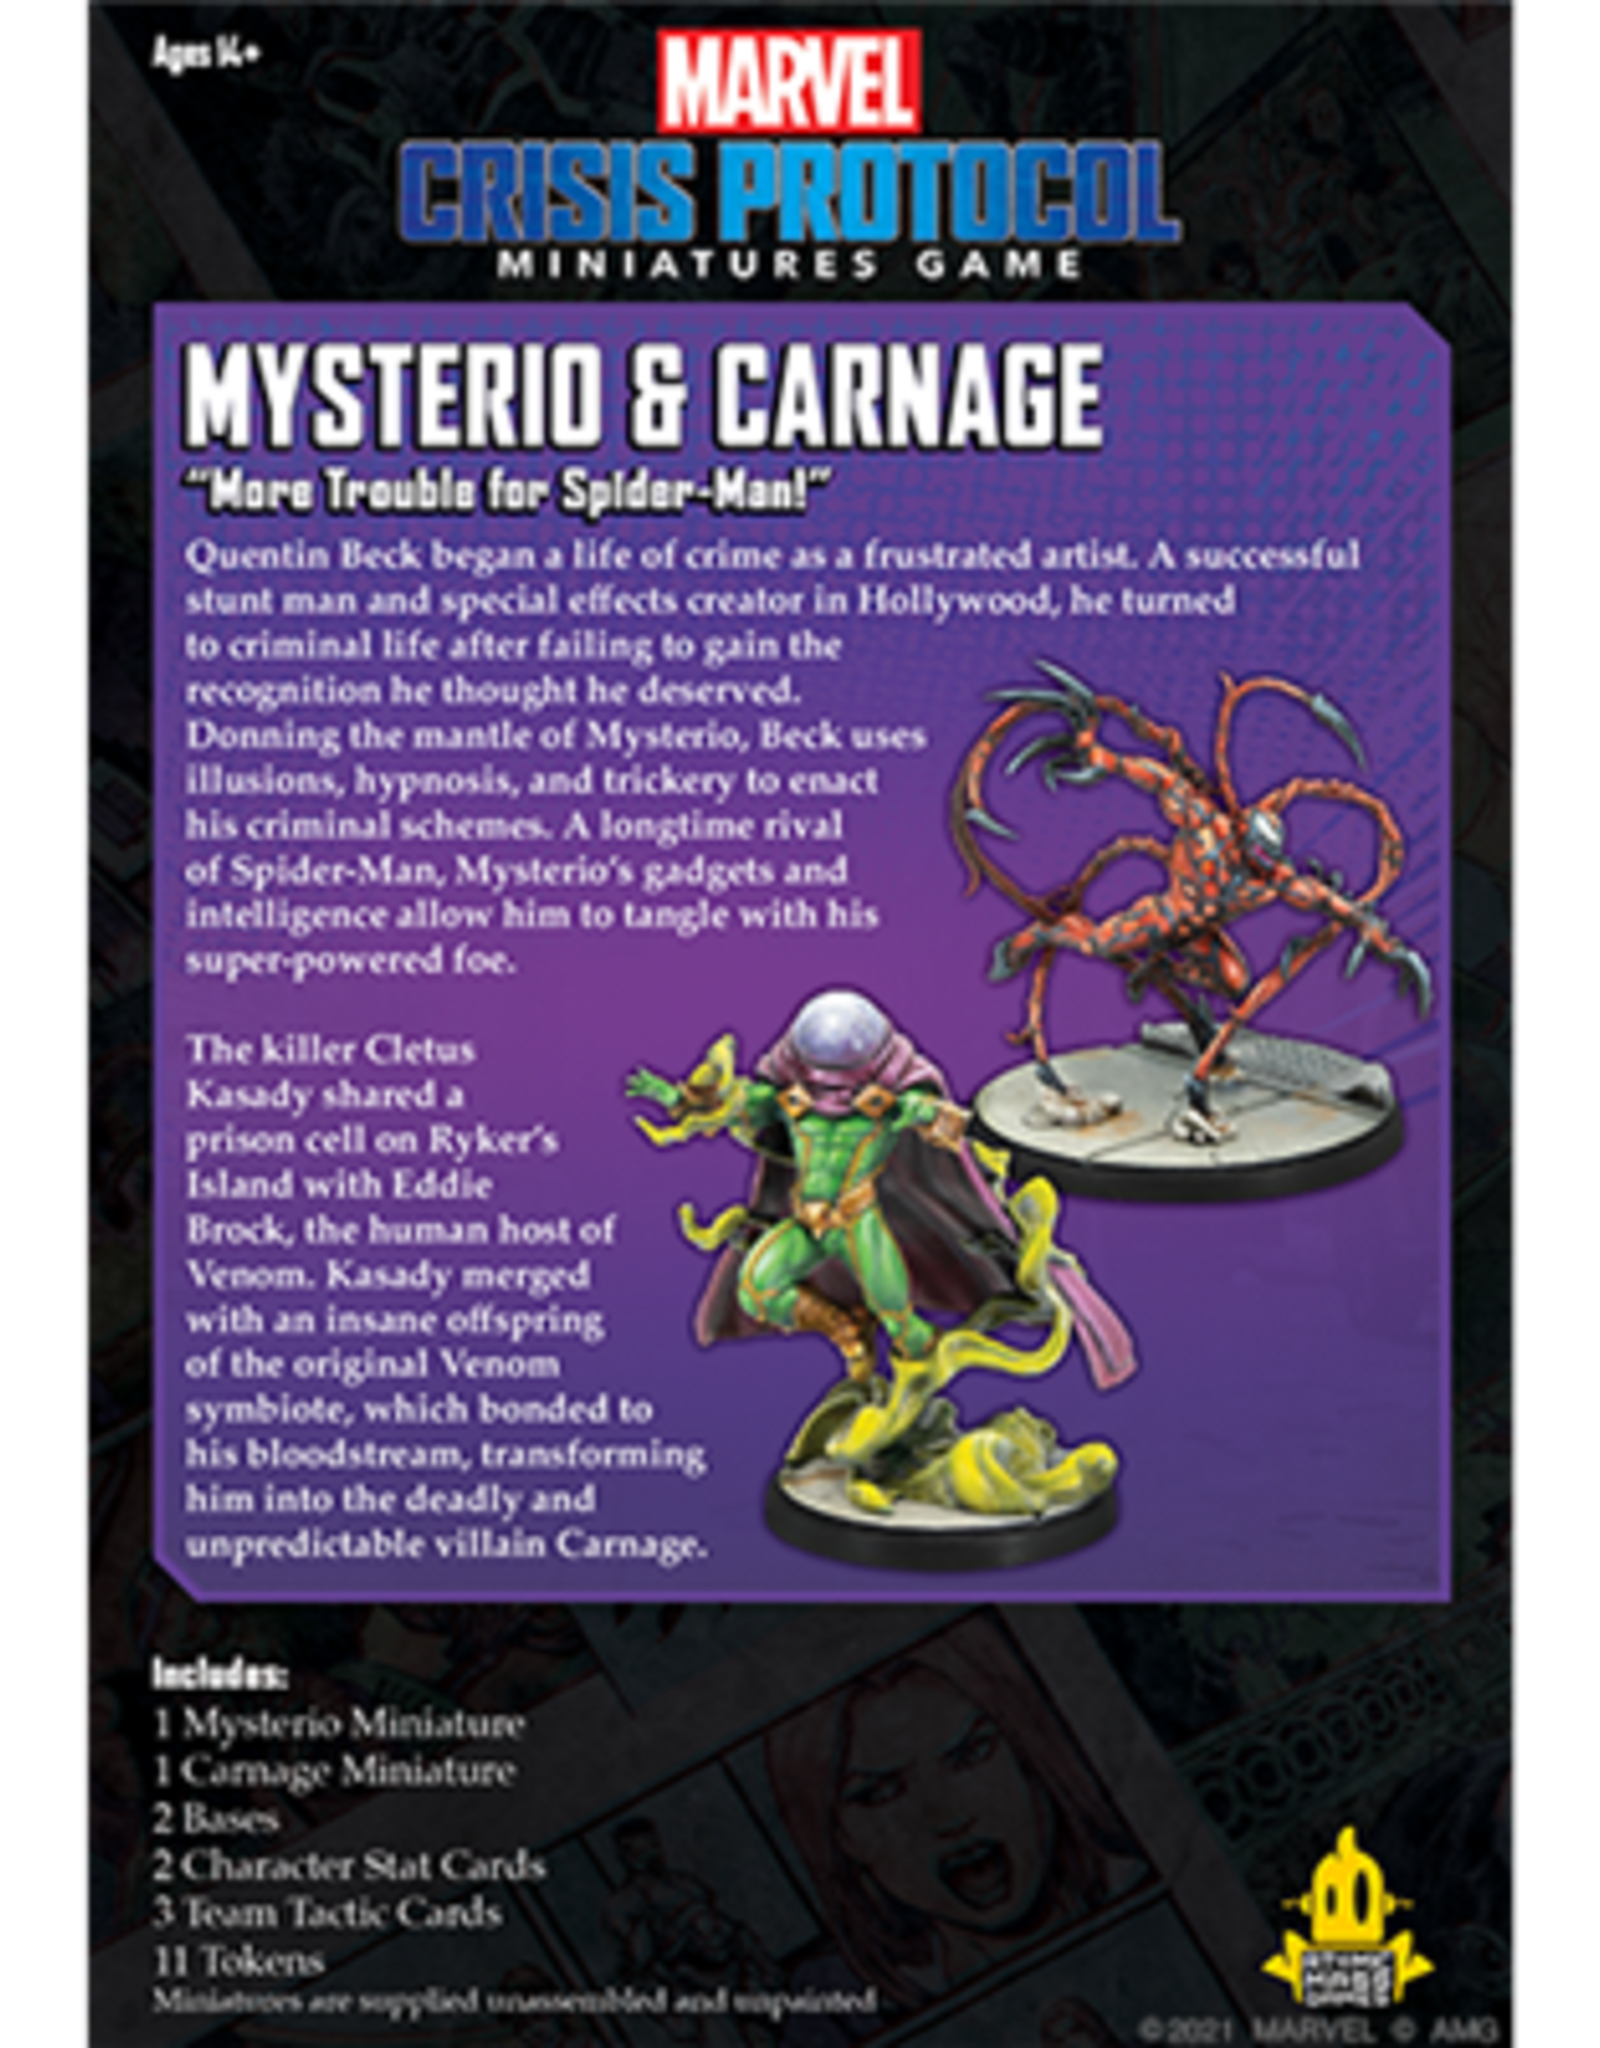 Atomic Mass Marvel Crisis Protocol Mysterio & Carnage Character Pack